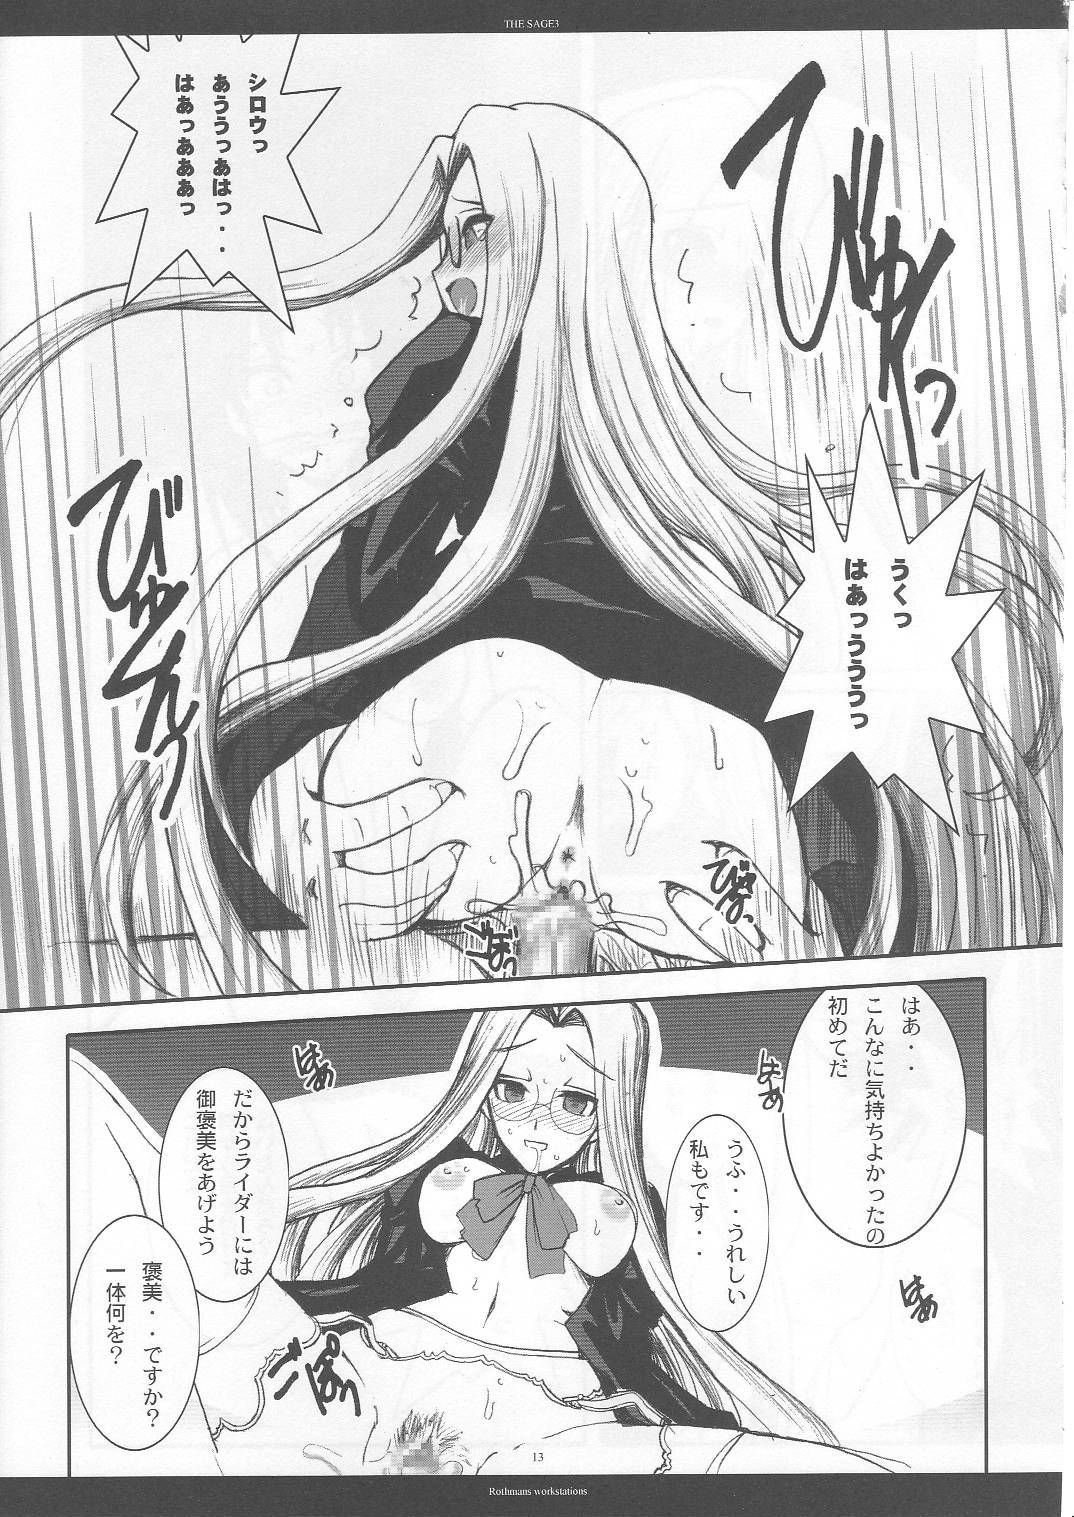 (C69) [R-WORKS (ROS)] THE SAGE 3 (Fate/stay night) page 12 full